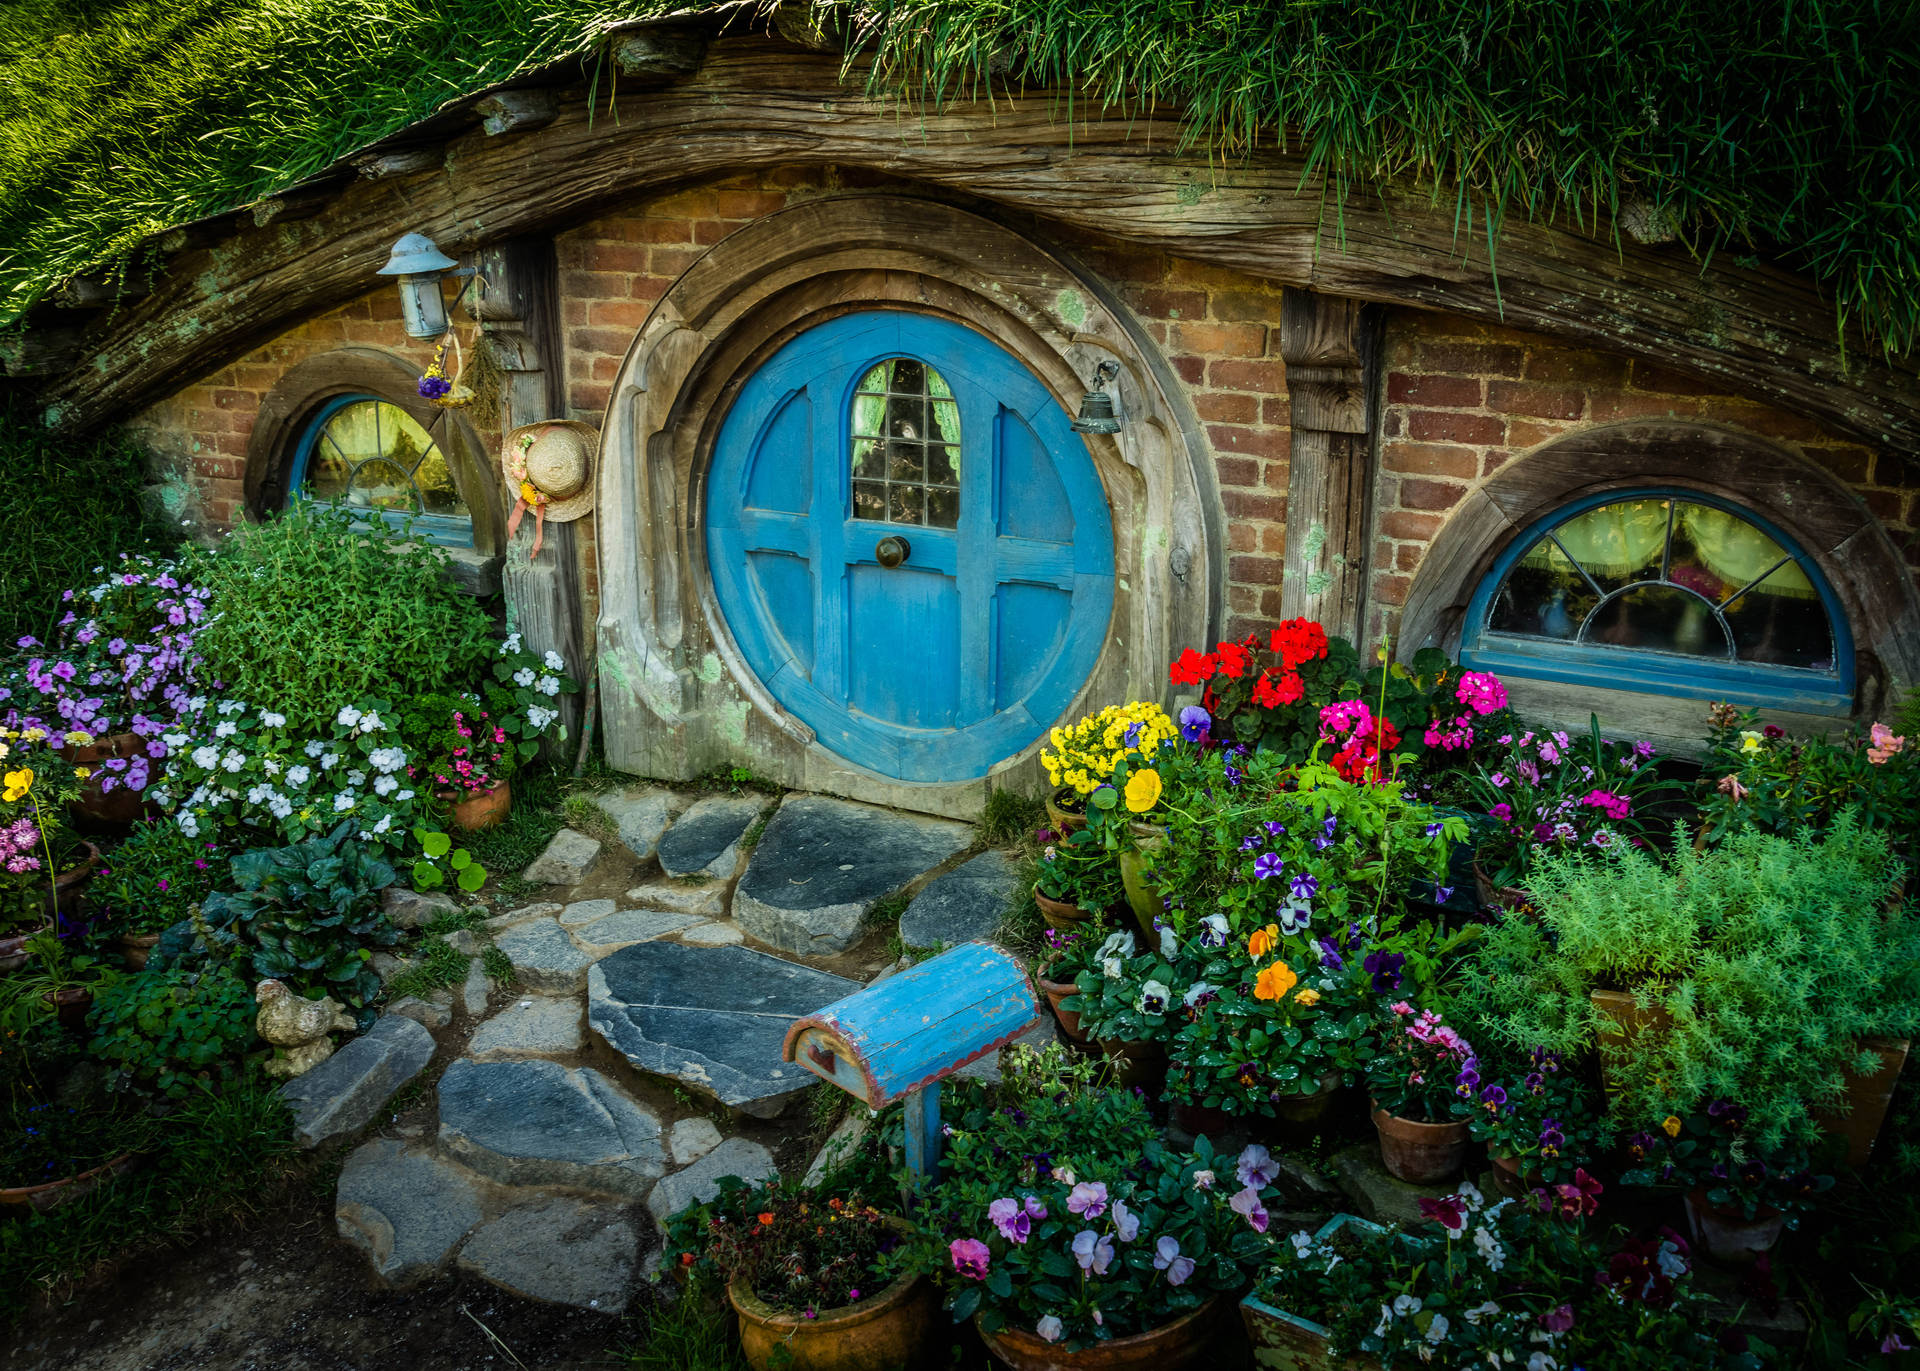 Caption: Enchanting Hobbit House Nestled In The Heart Of New Zealand's Countryside